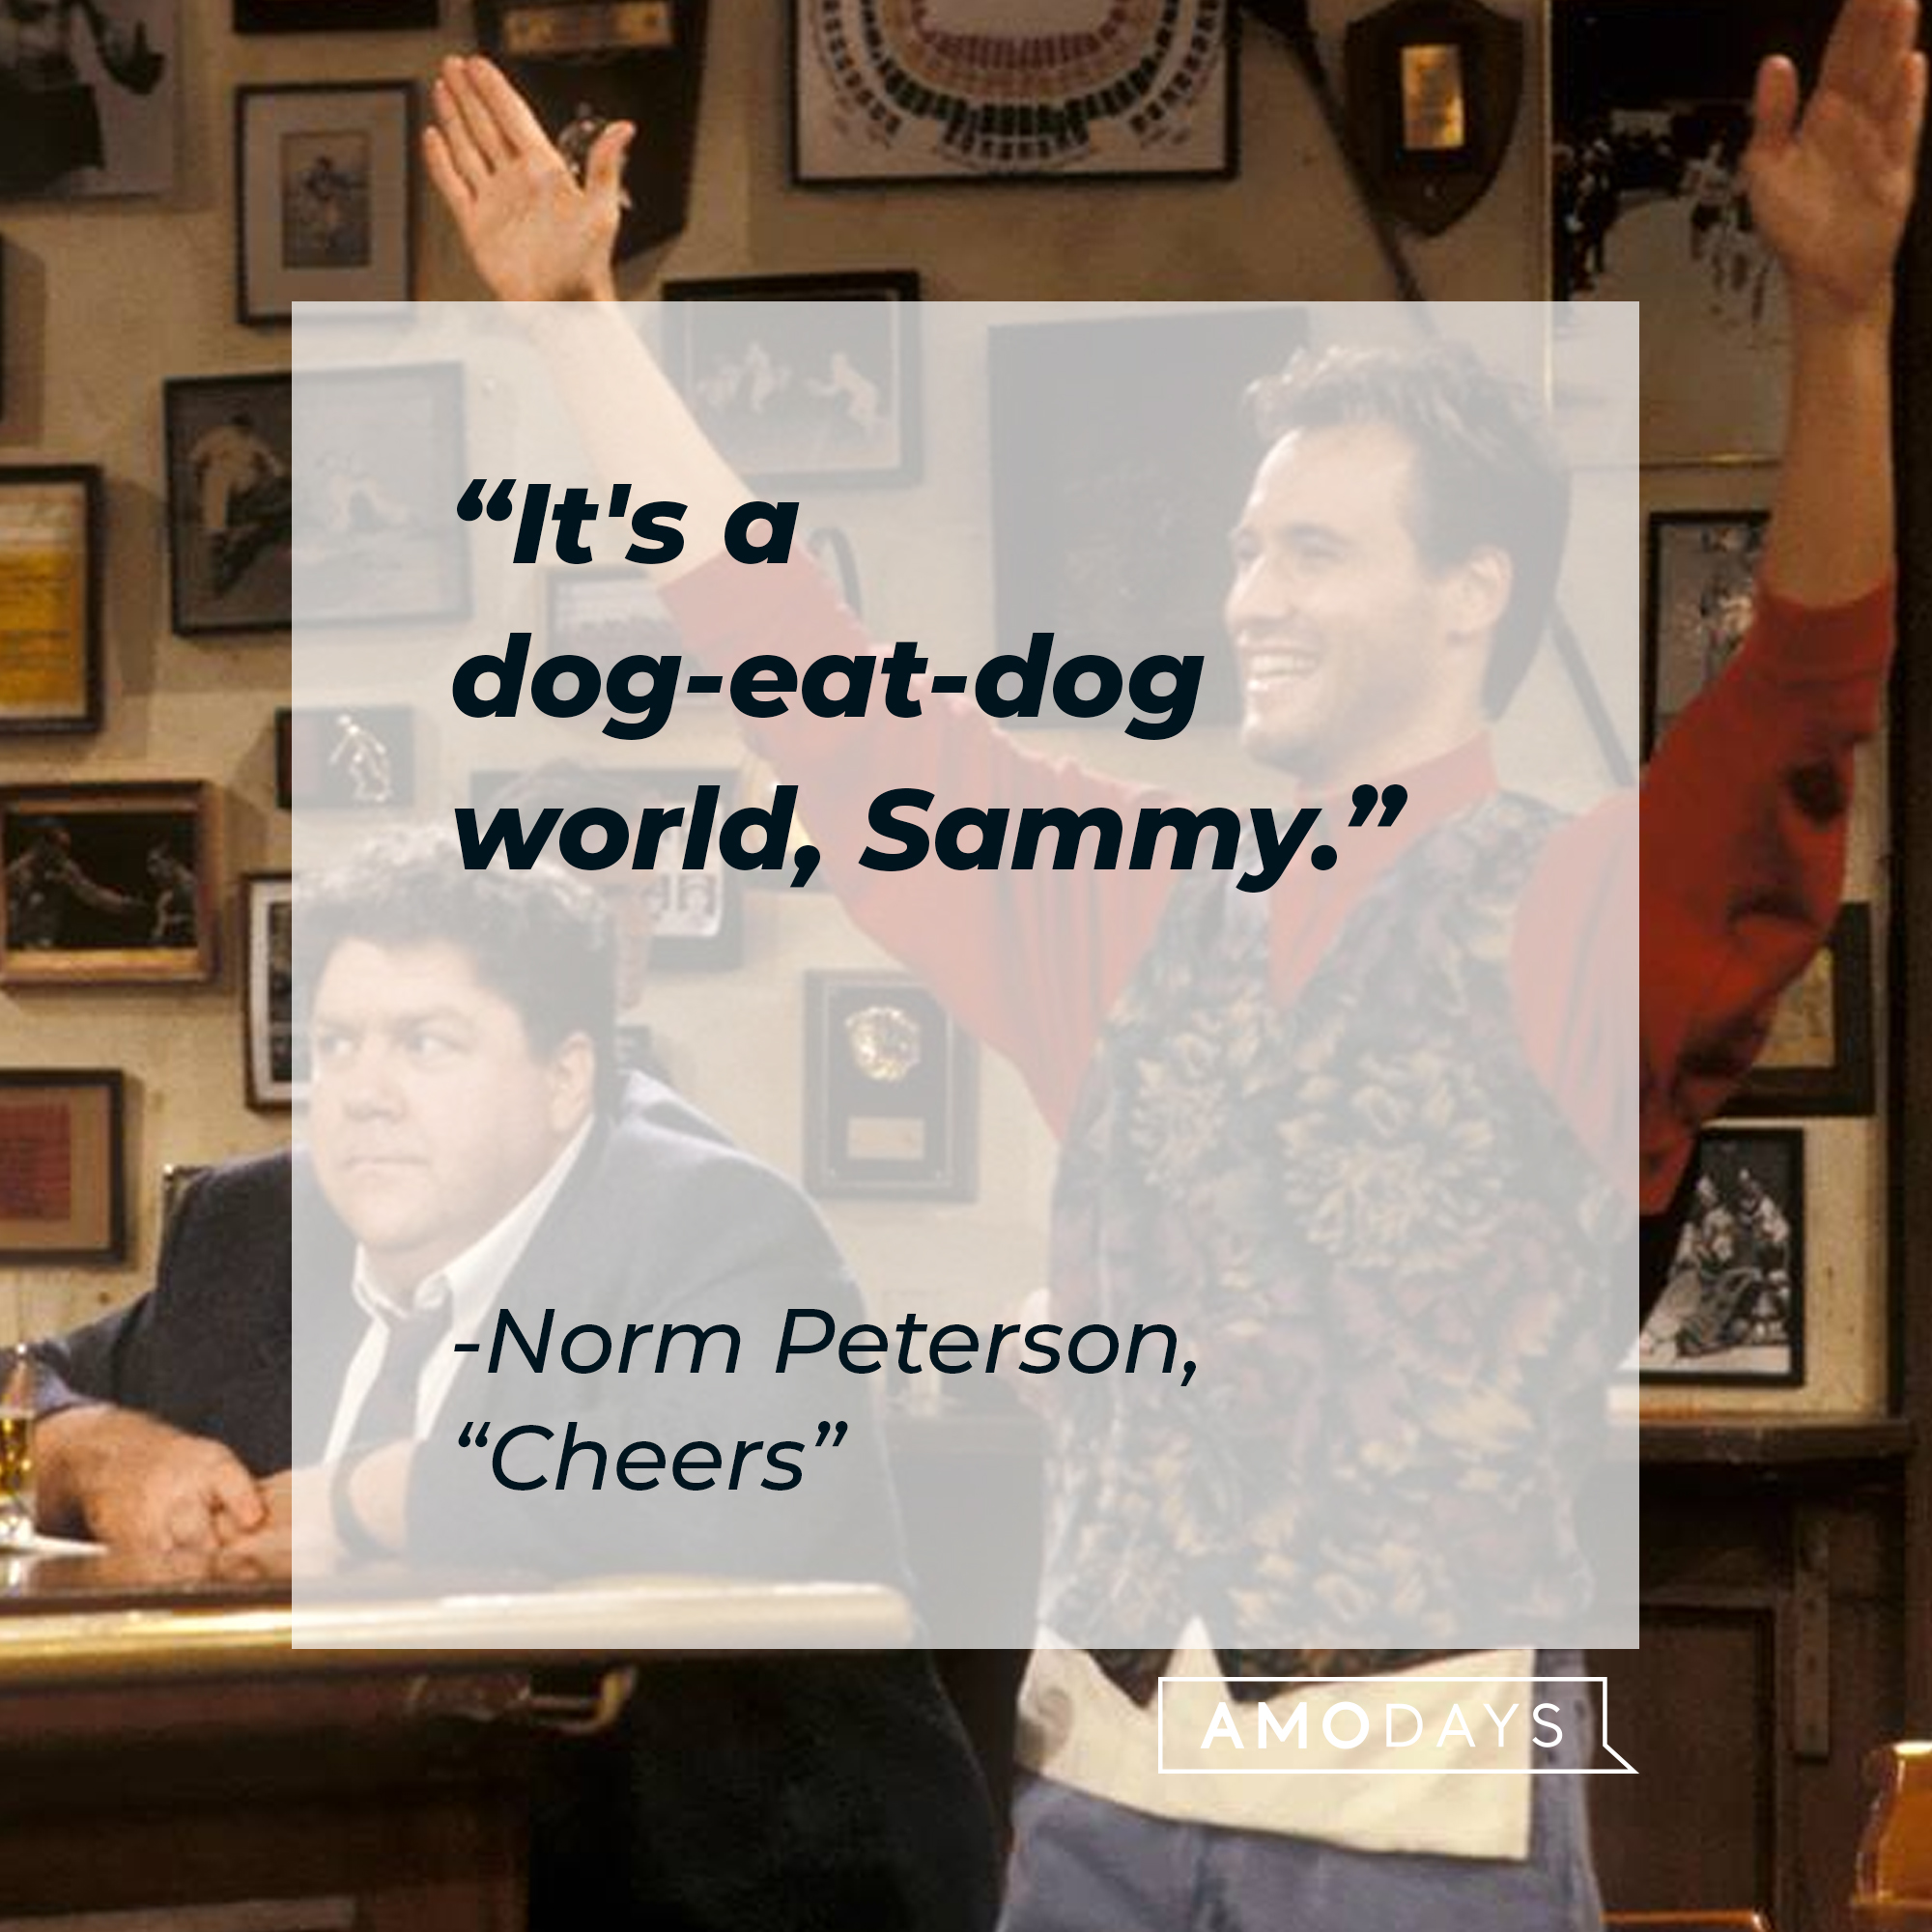 Norm Peterson with his quote: "It's a dog-eat-dog world, Sammy." | Source: Facebook.com/Cheers